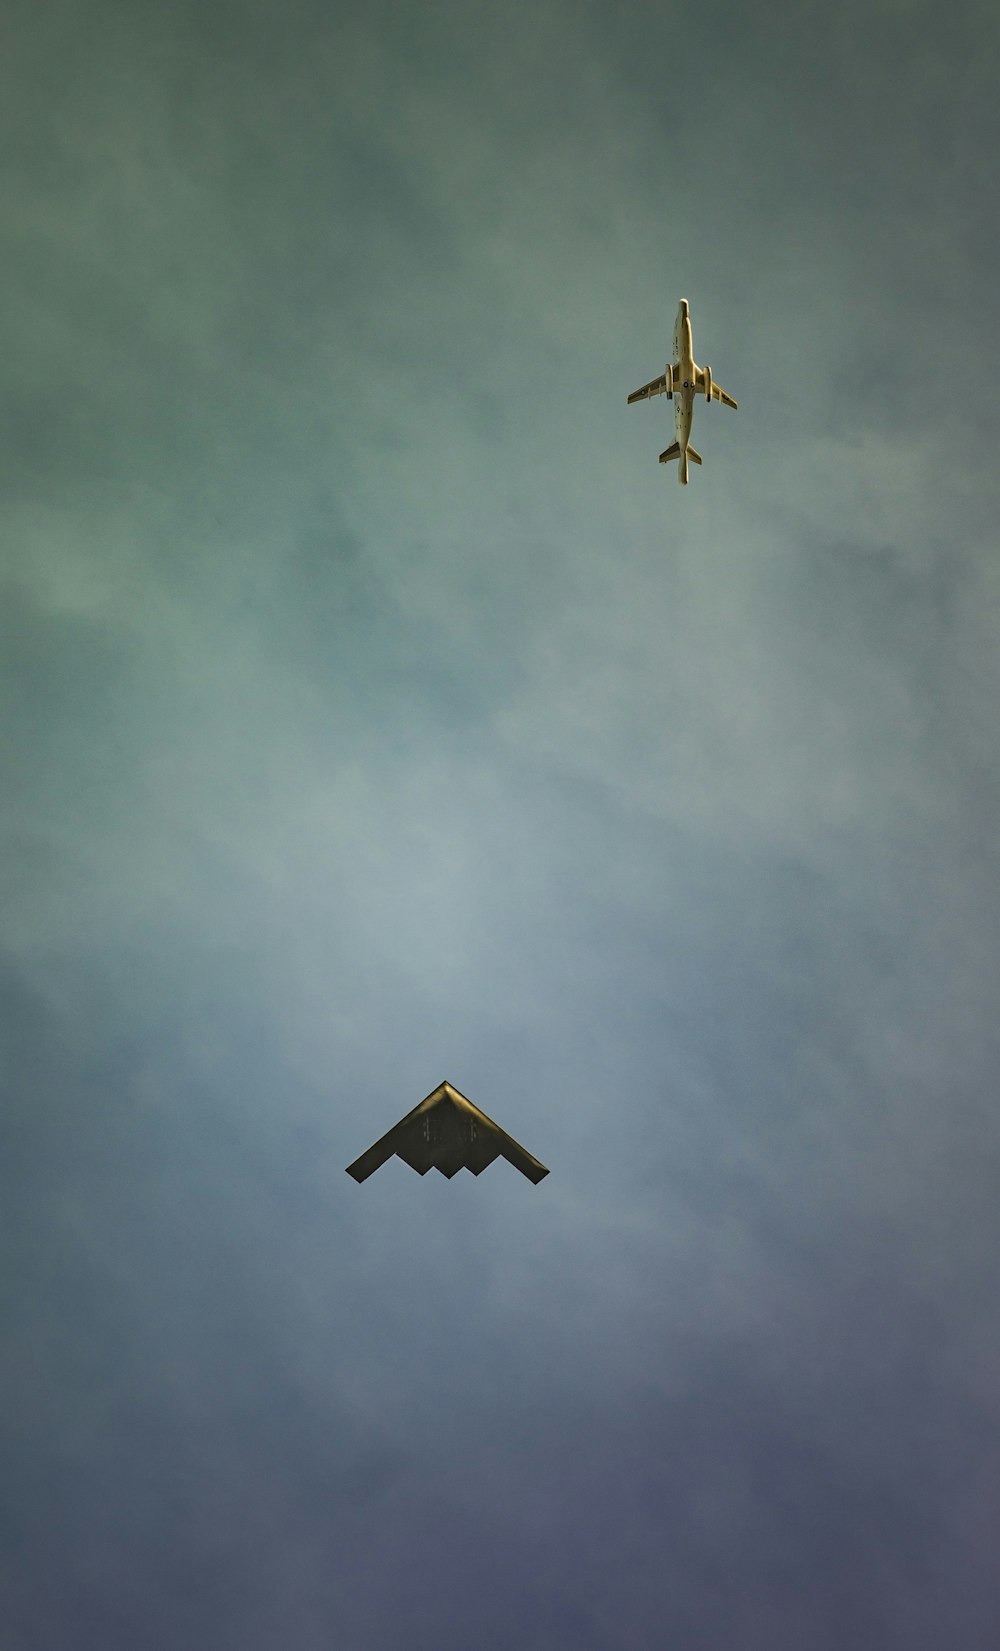 two fighter aircraft on air